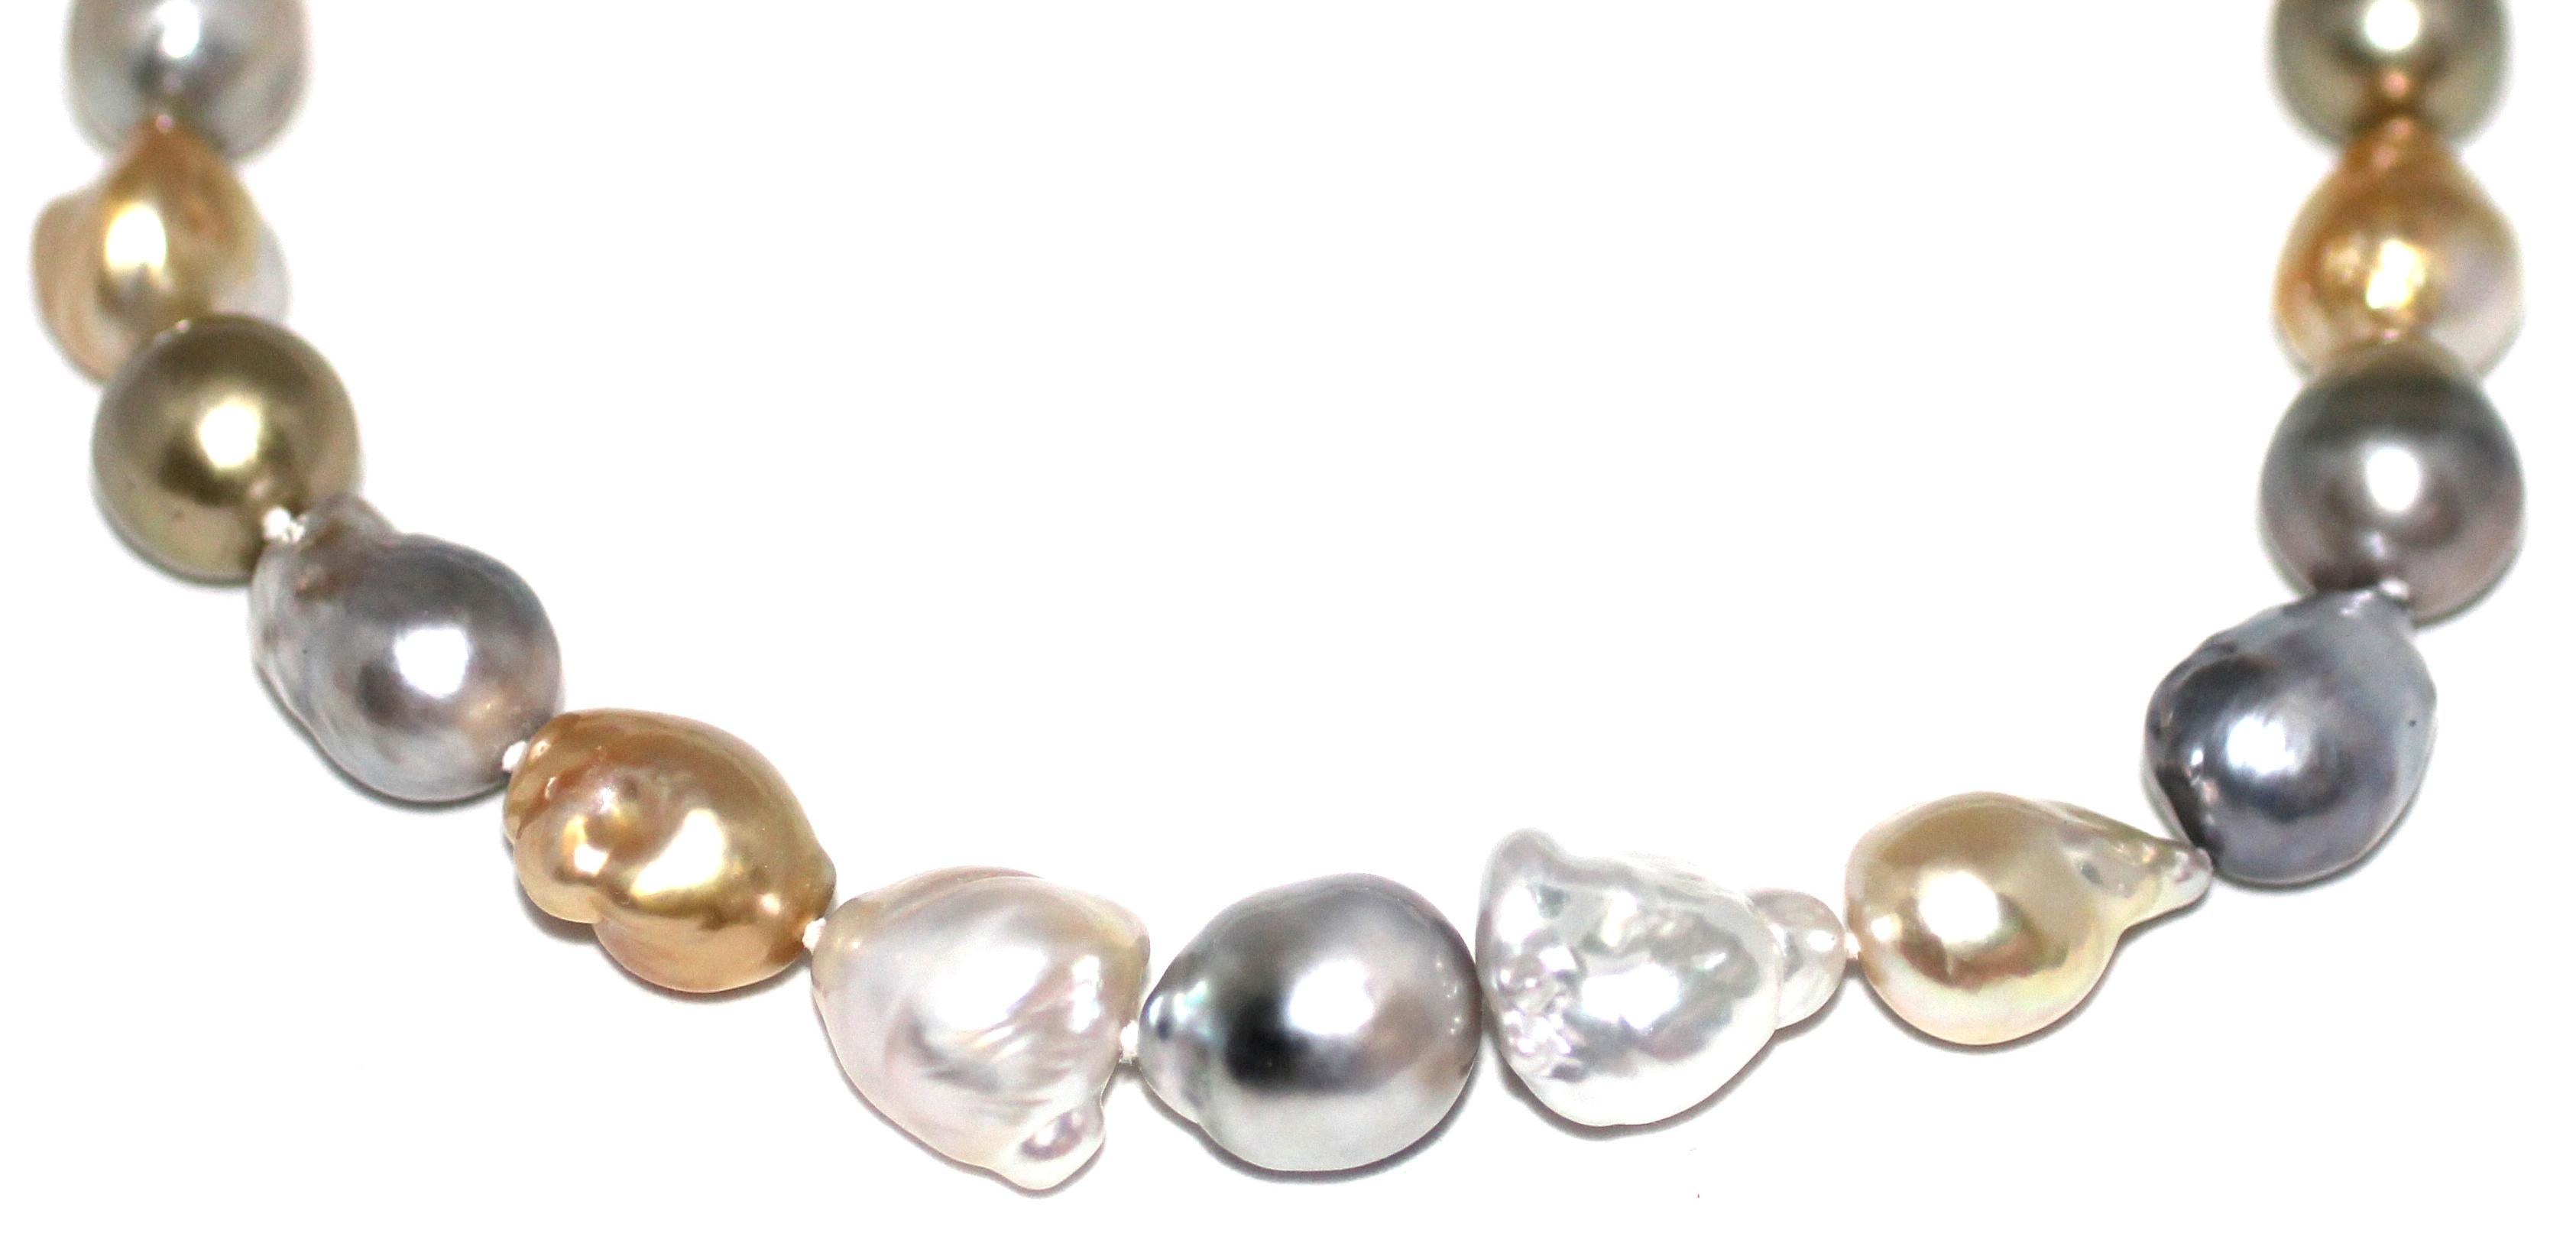 value of baroque pearls